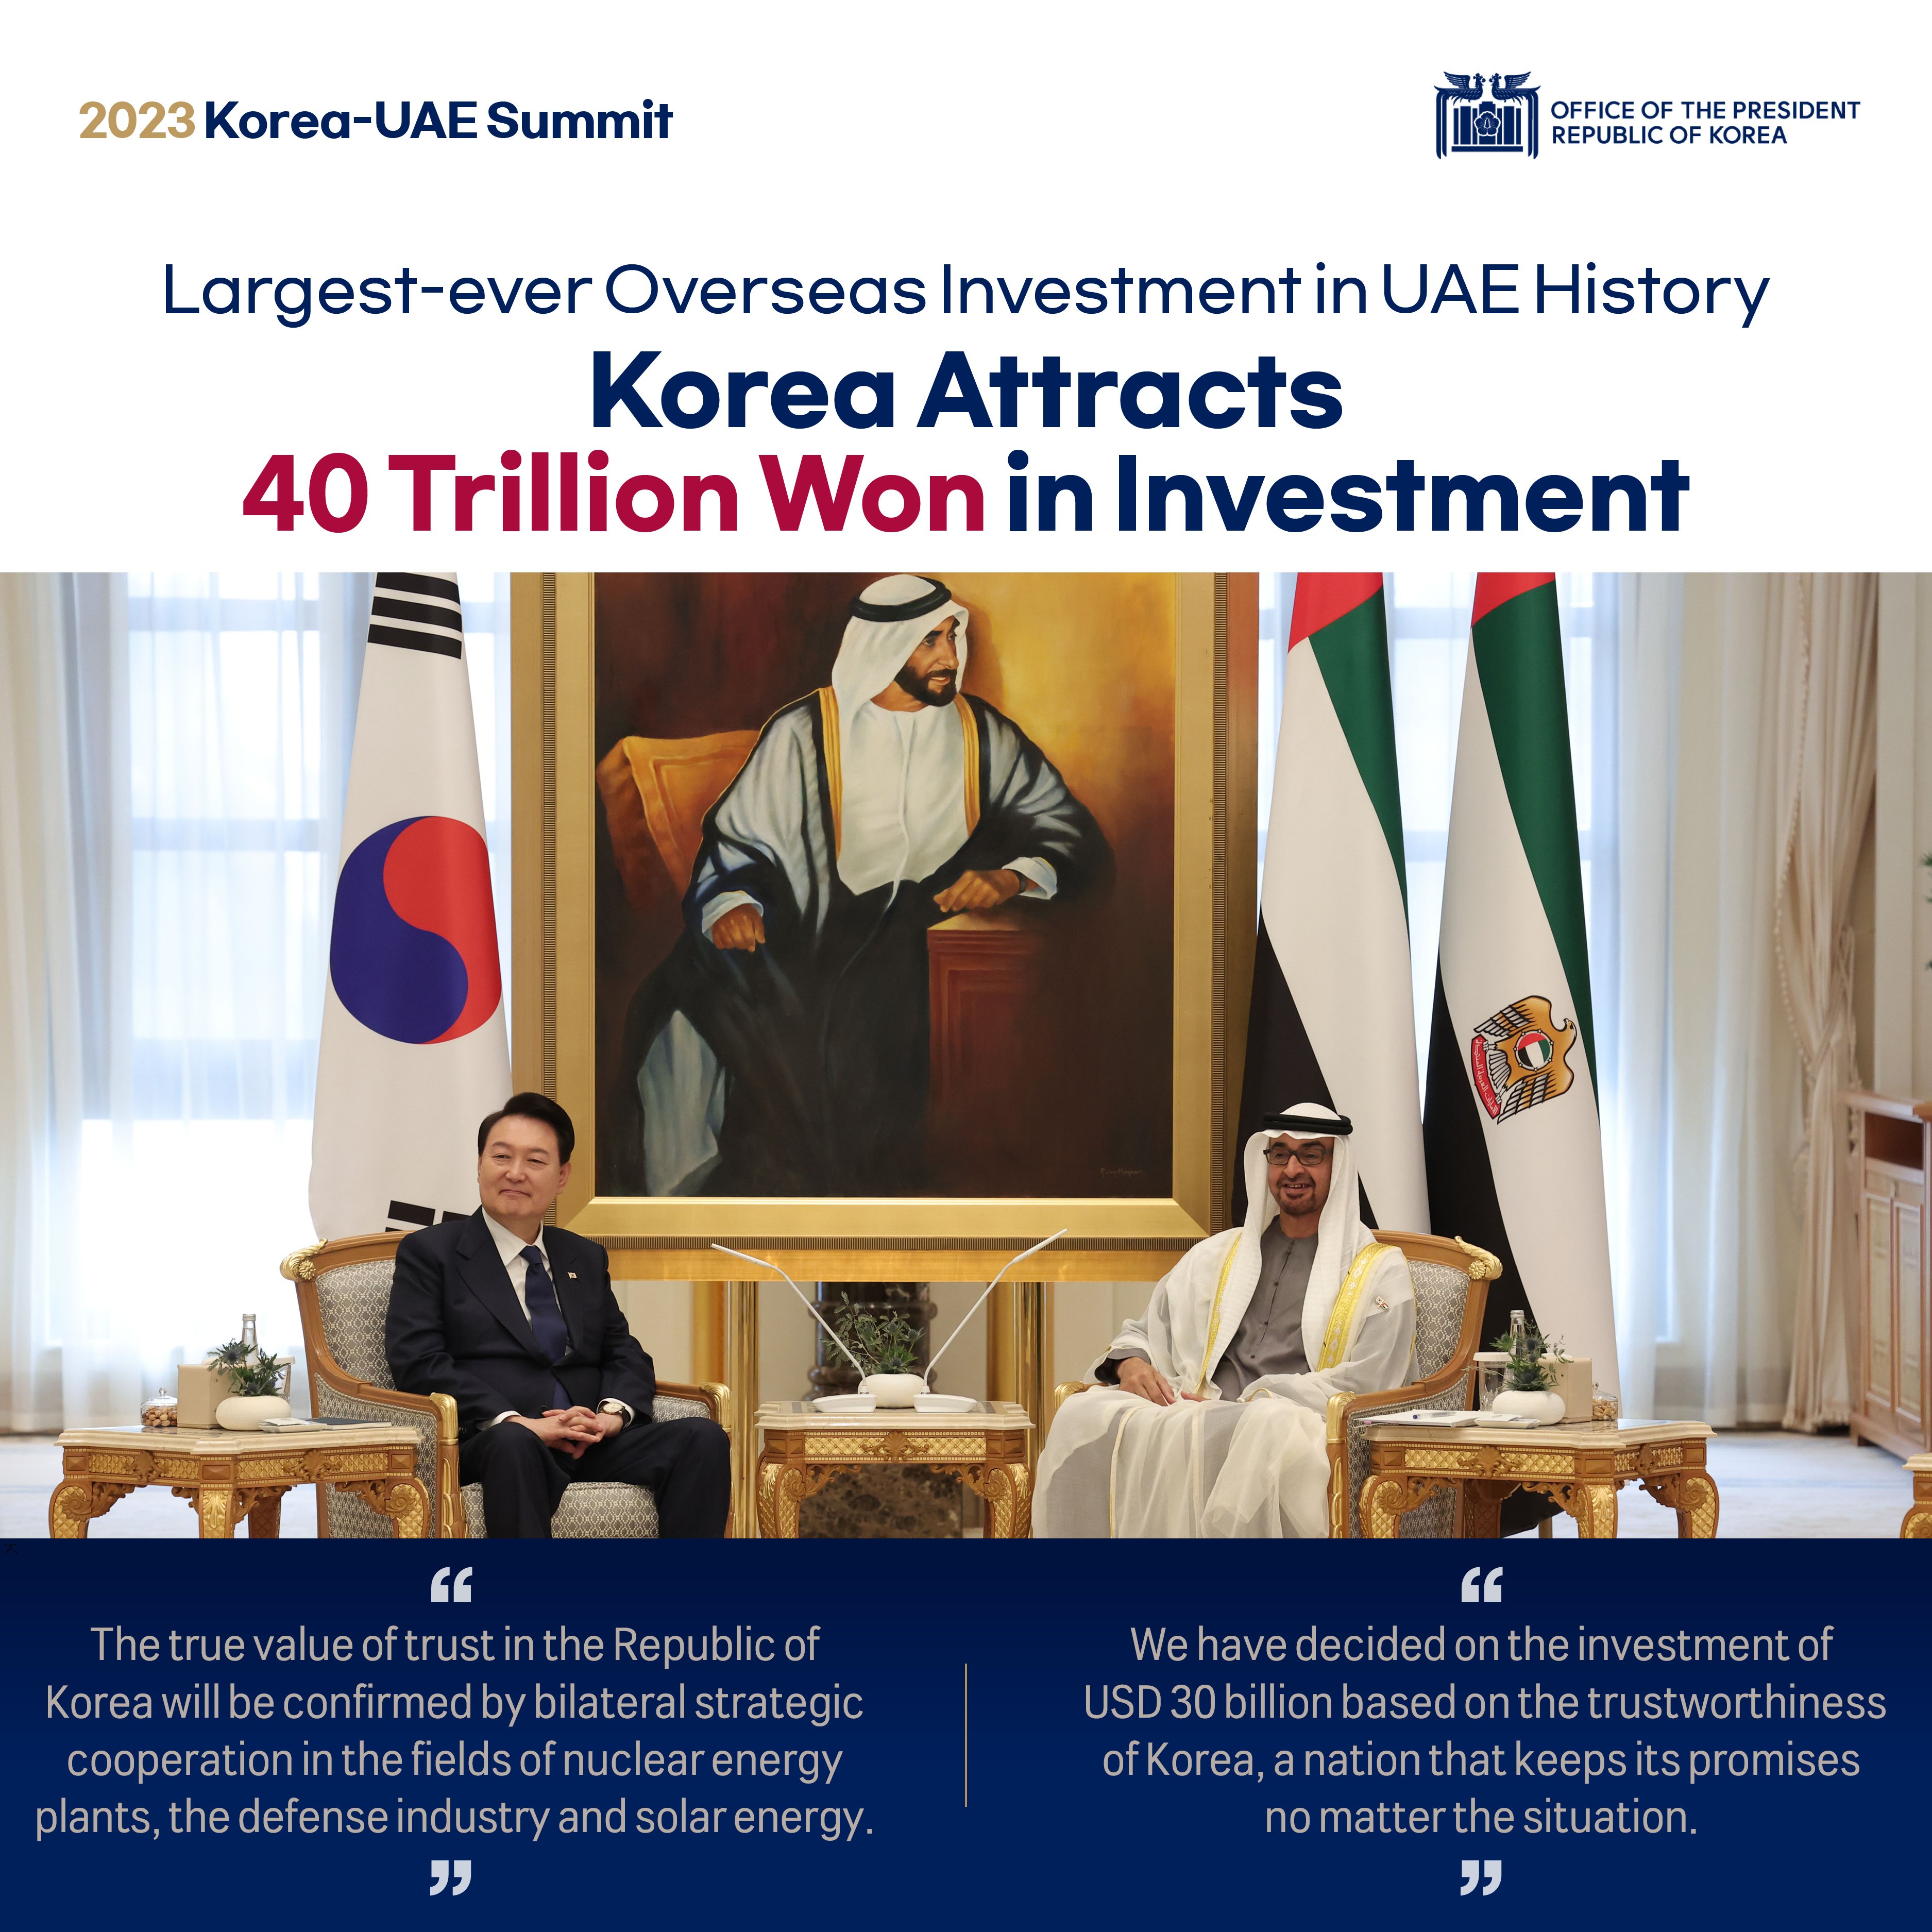 Korea Attracts 40 Trillion Won in Investment from the UAE, the Emirates’ Largest Overseas Investment Ever